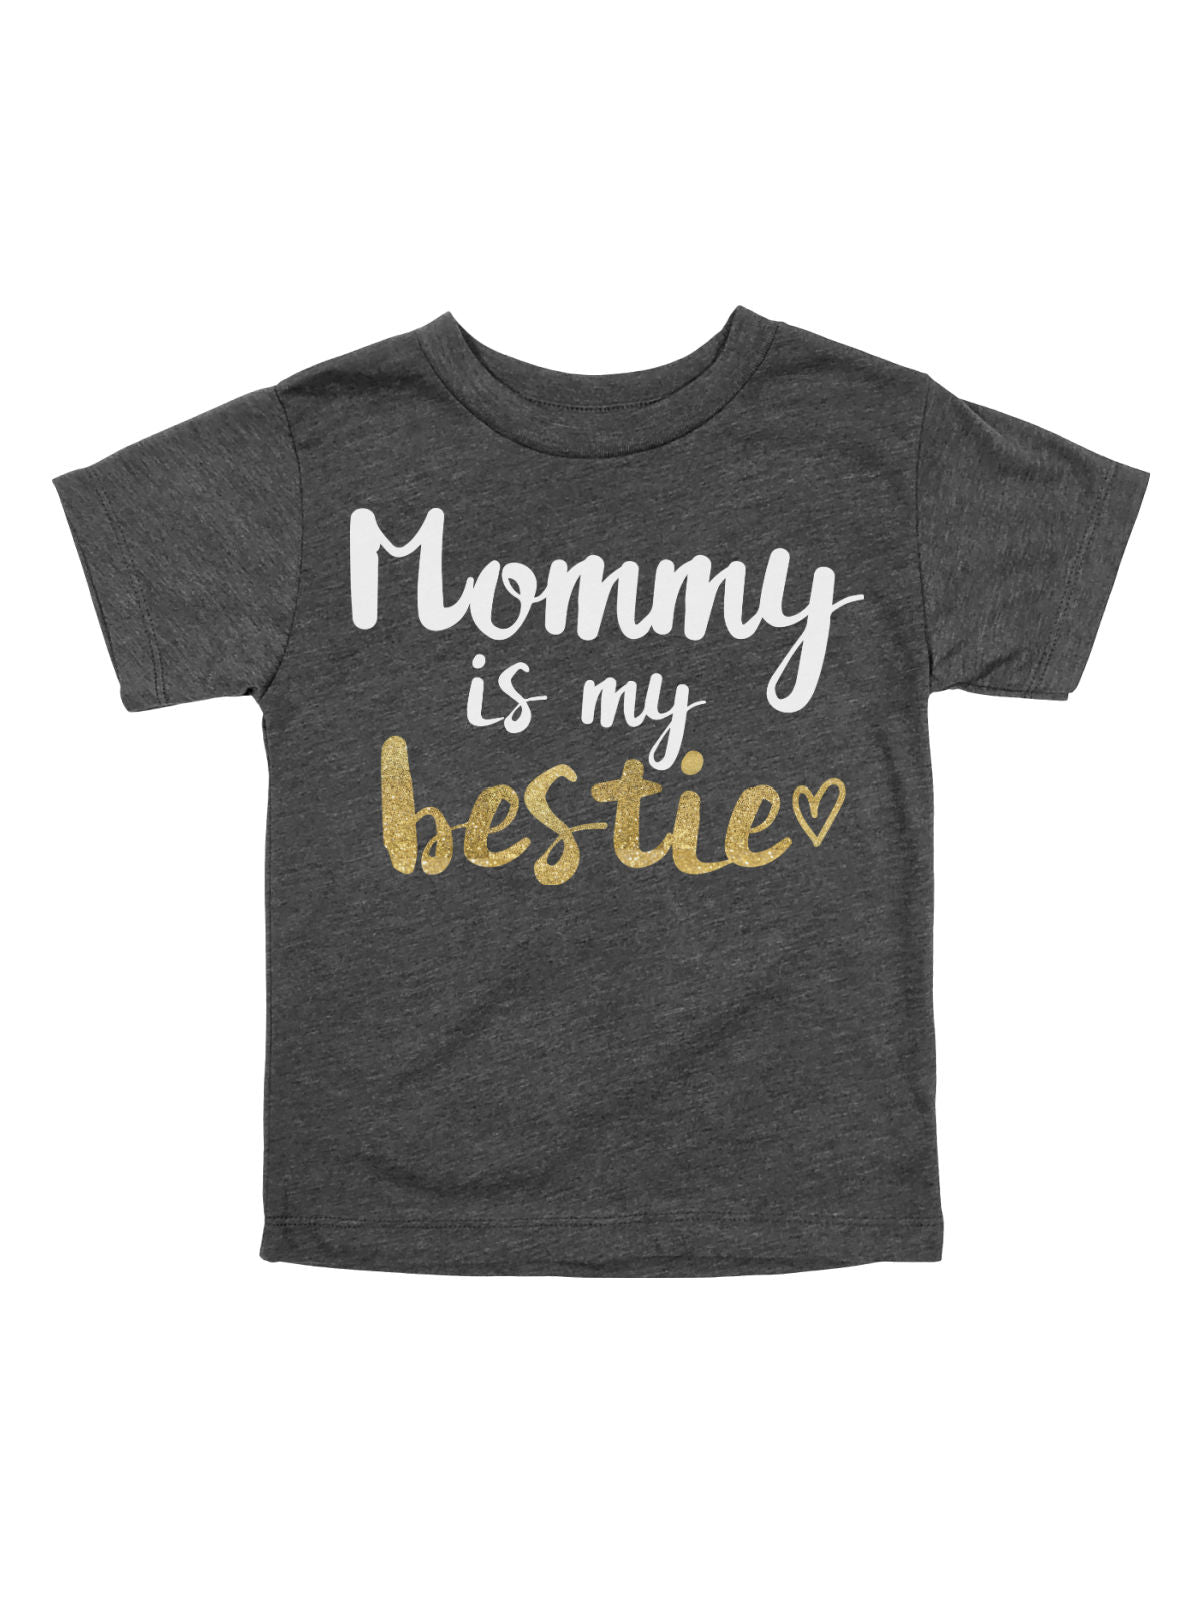 Mommy is my Bestie Girls Shirts - Gray, Pink, Natural, & Dusty Blue